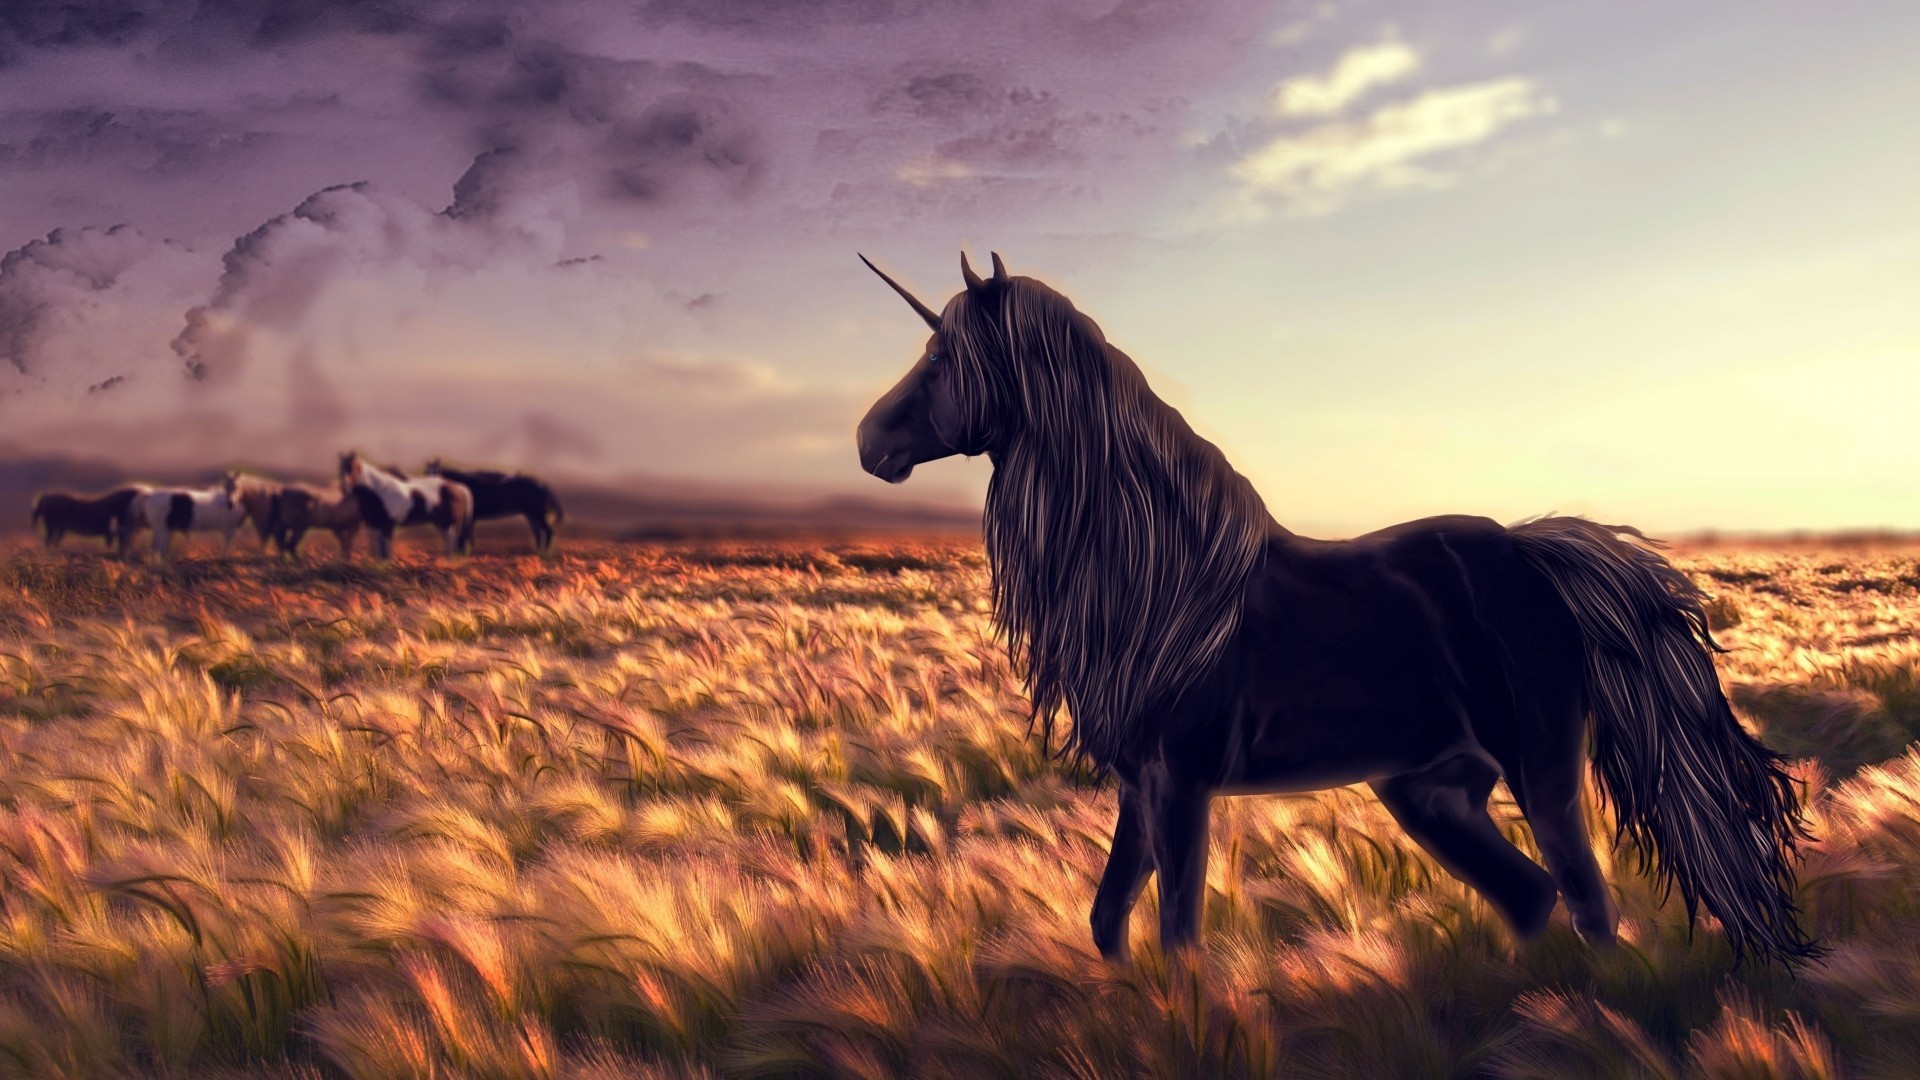 1920x1080 60+ Horse Wallpapers in HD, , 1080p and many High Resolution Horse  Wallpapers